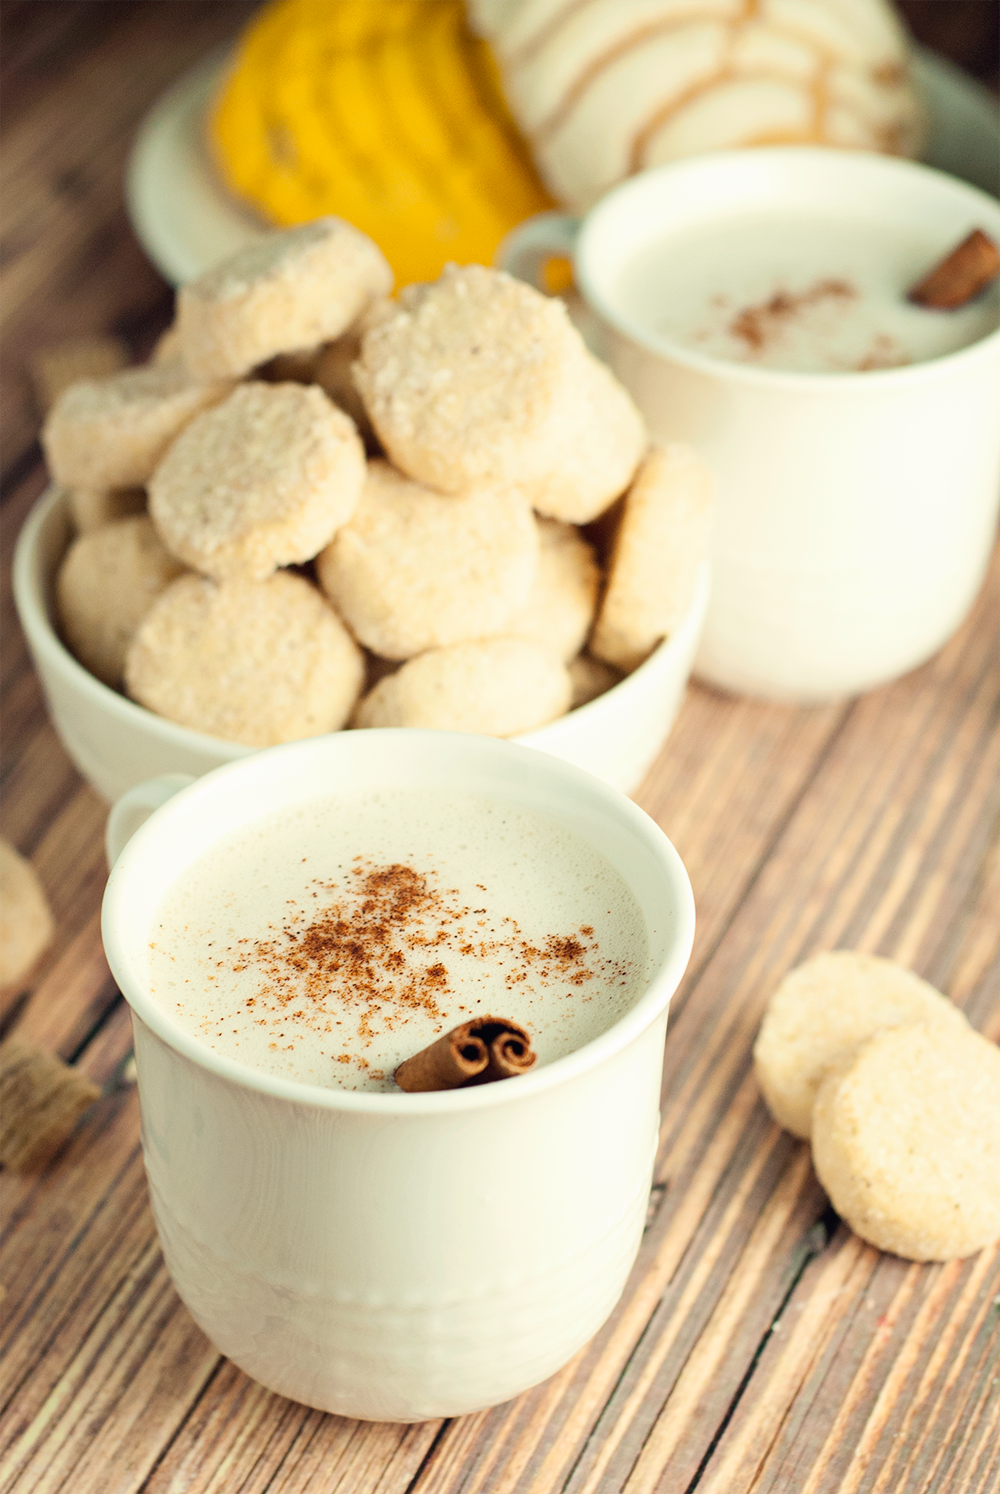 Warm your soul with this amazingly flavorful Avena Caliente (Spiced Hot Oatmeal Drink), perfect for cold winter nights!